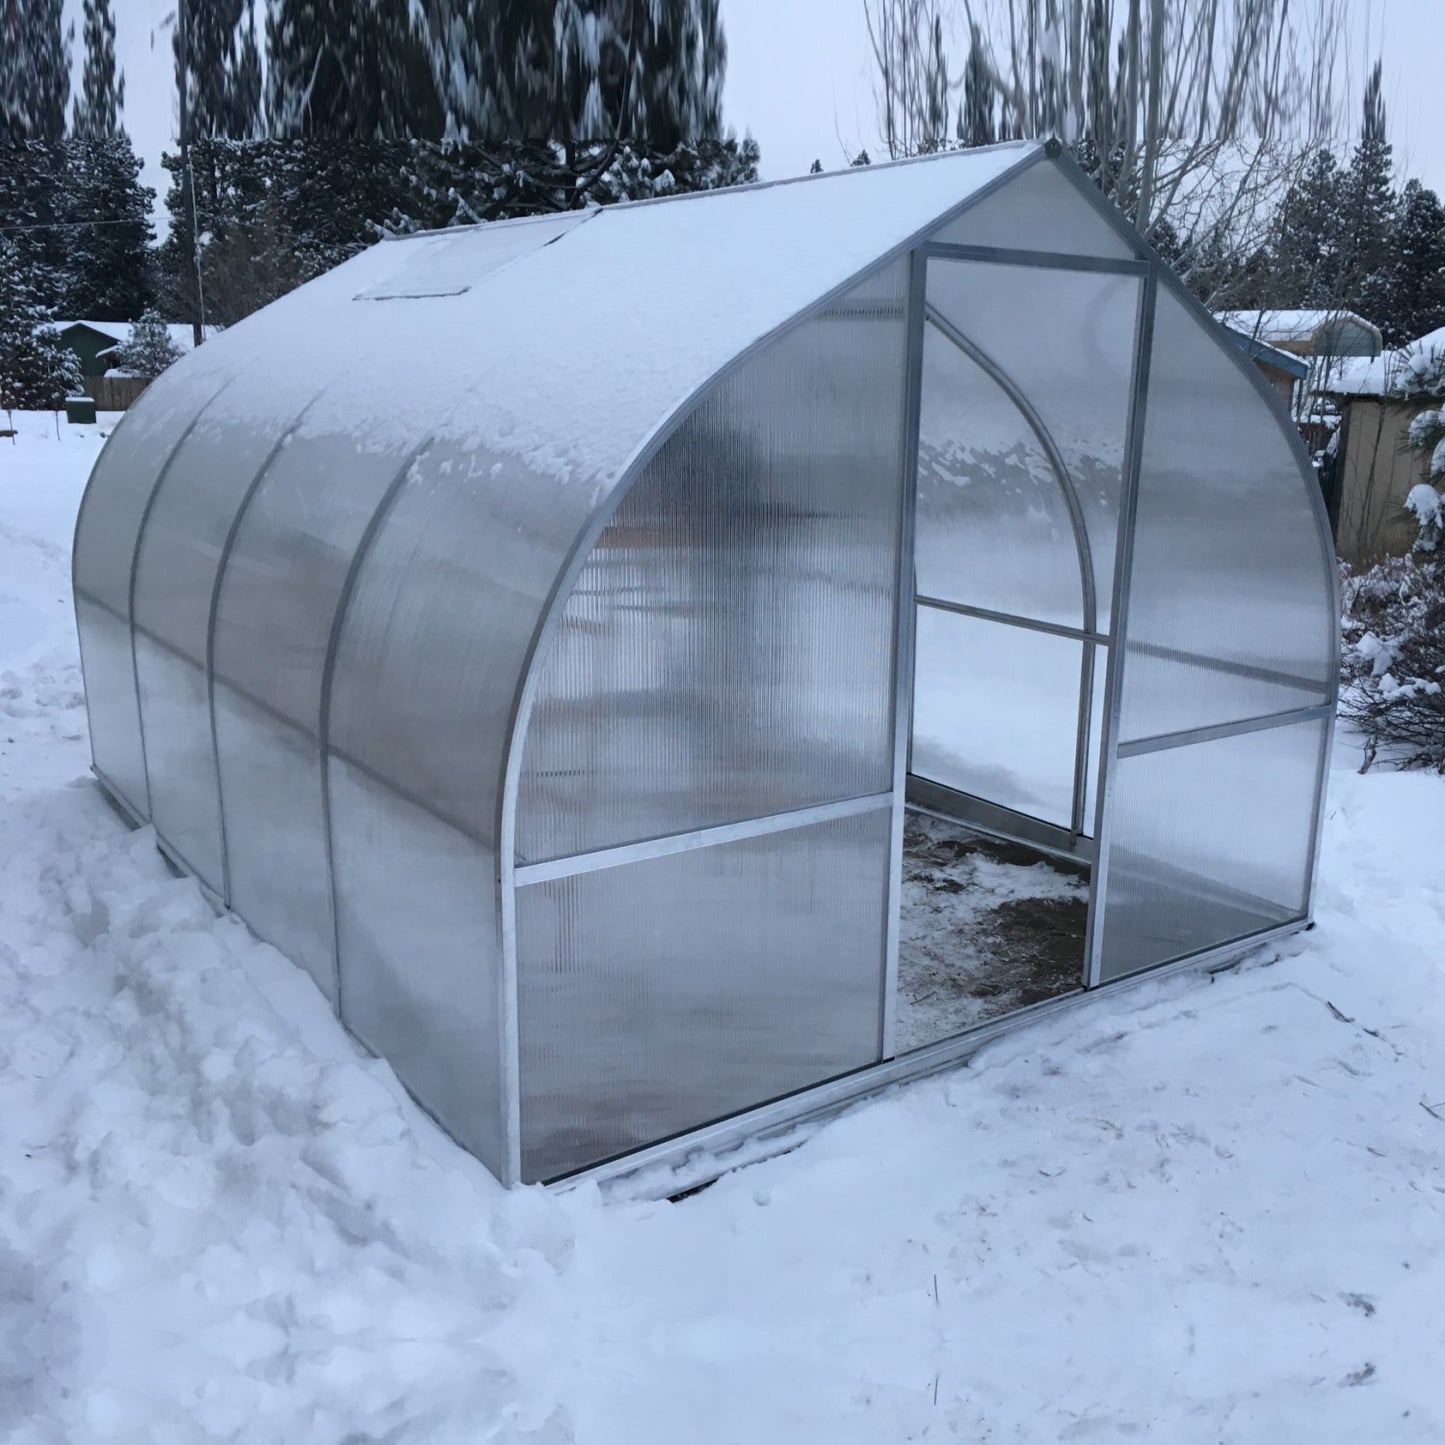 Hoklartherm | 7ft 8in x 14ft x 7ft 1in RIGA 4S Hobby Greenhouse Kit With 8mm Twin-wall Polycarbonate Glazing